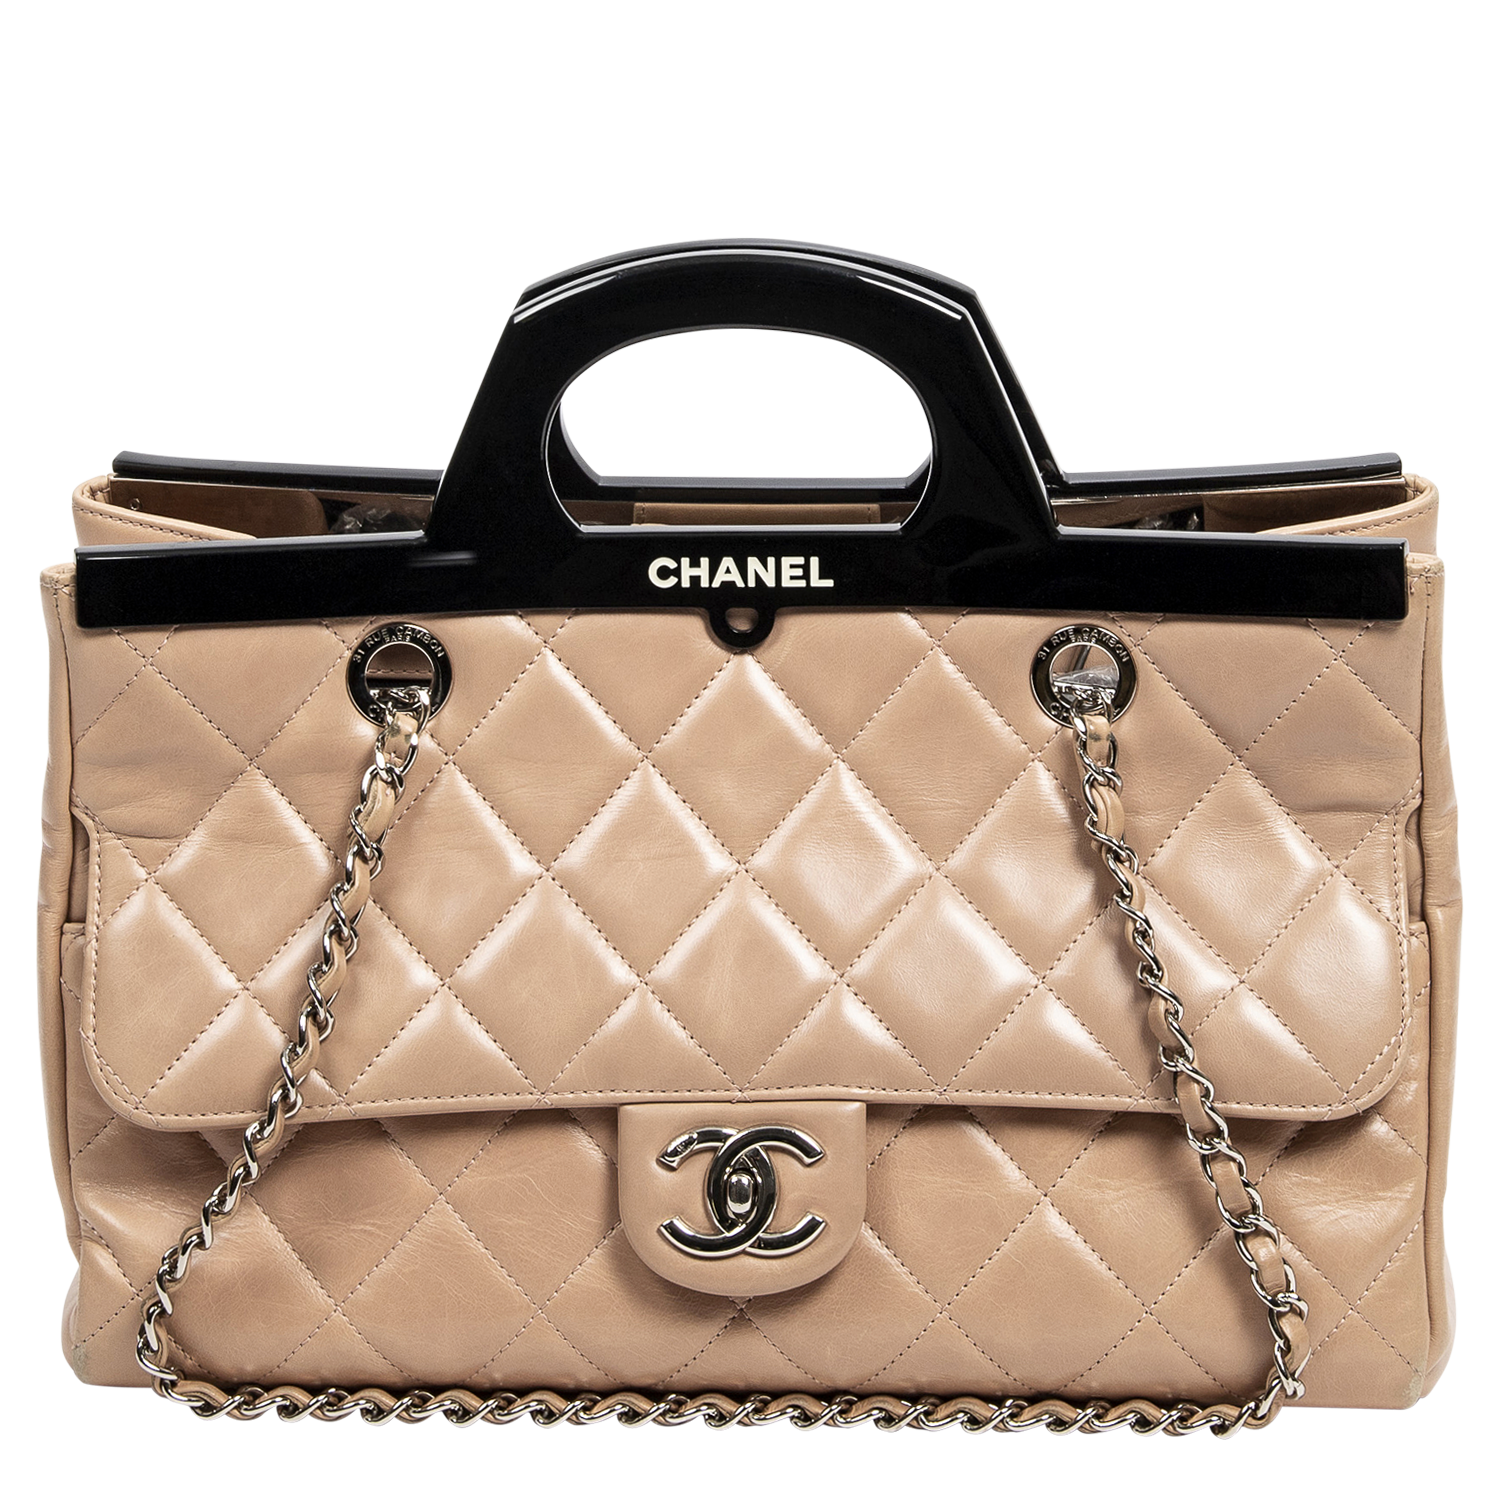 Chanel 2015 Limited Edition Delivery Tote